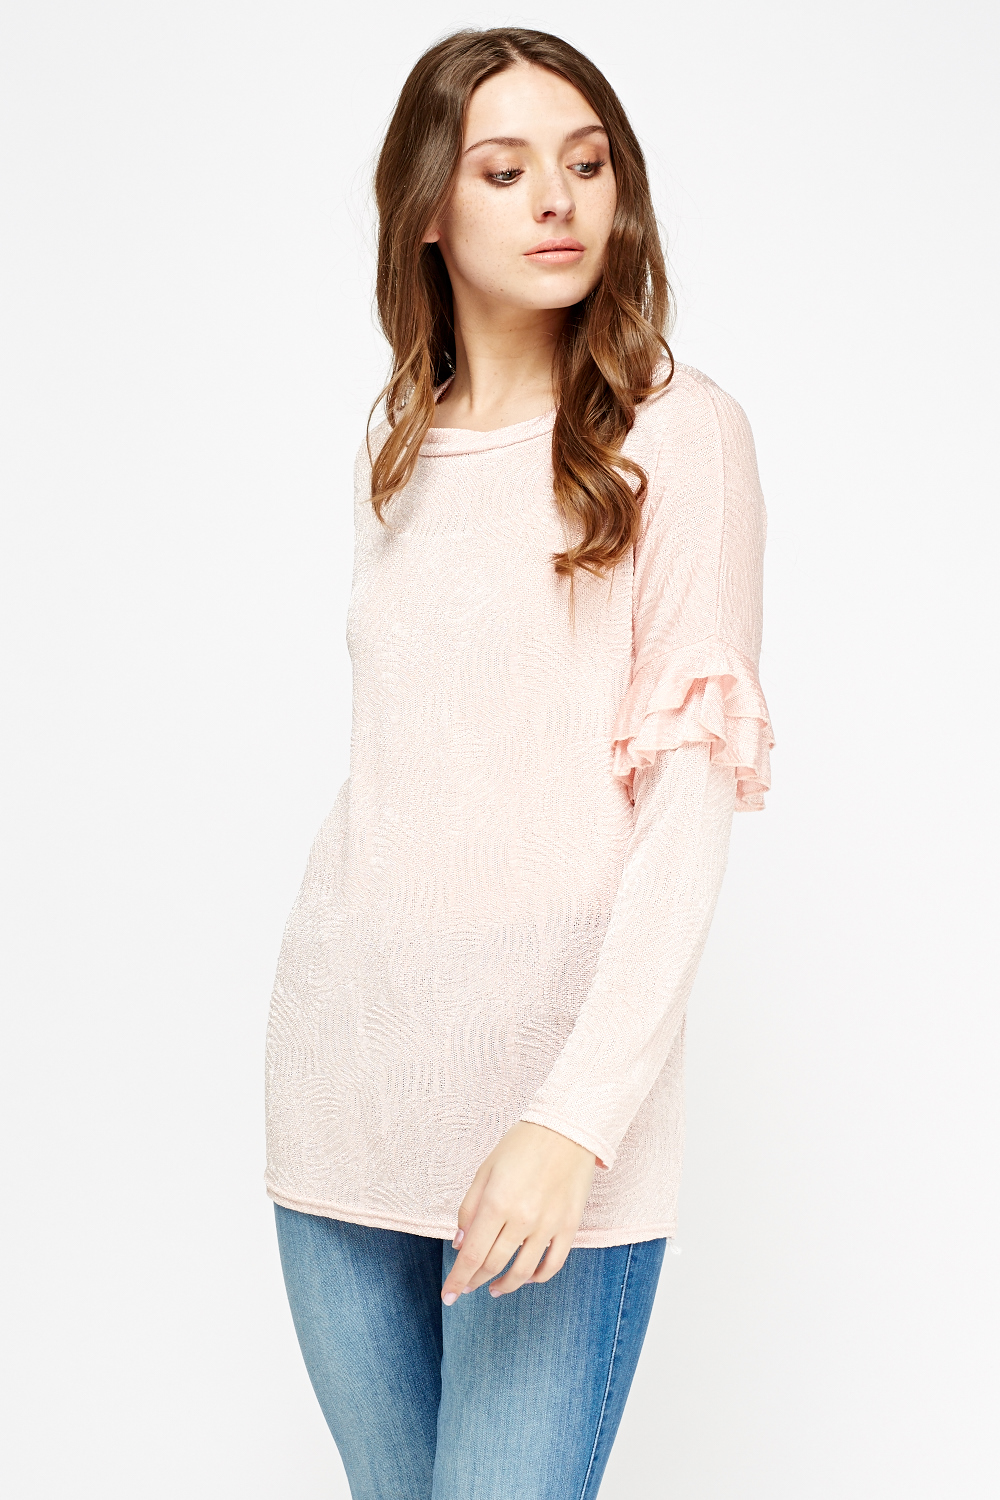 Thin Loose Knit Flare Long Sleeve Top - Just $6